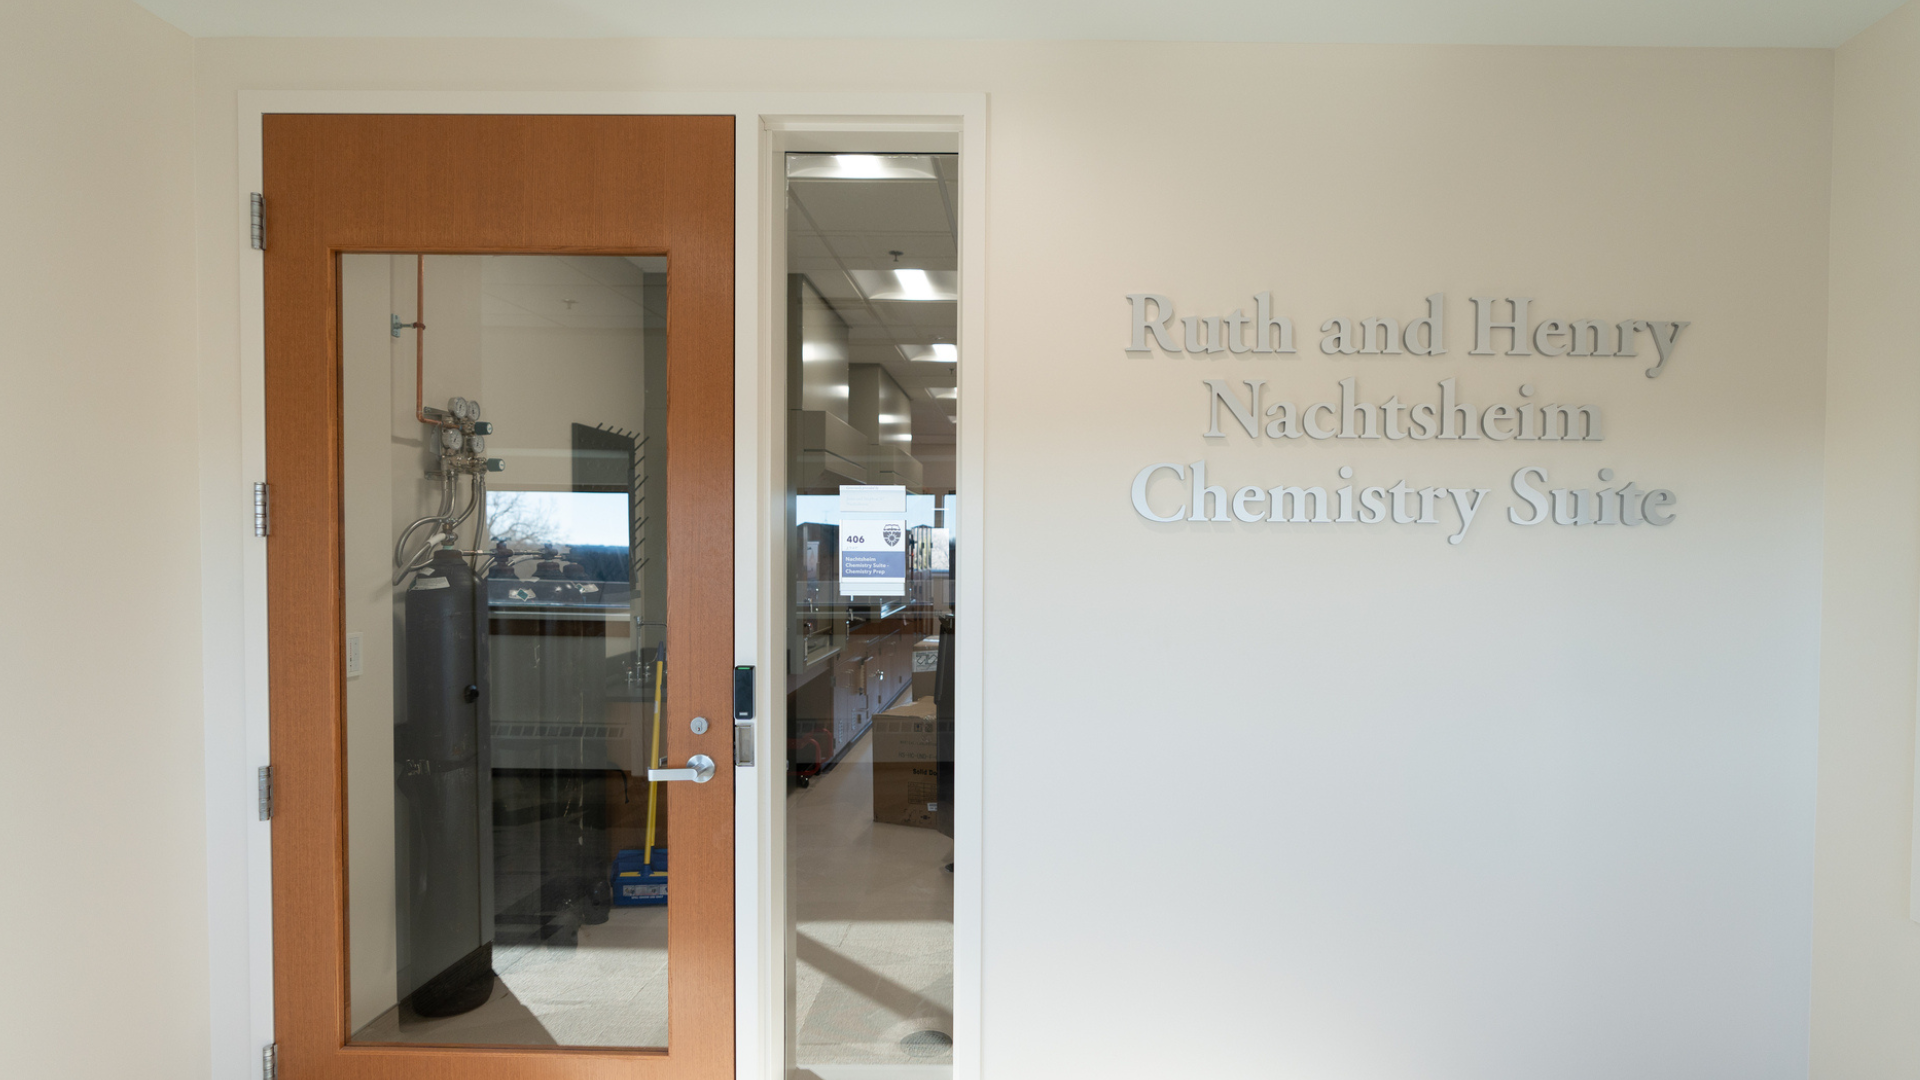 Outside of the chemistry suite with the naming donors on the wall